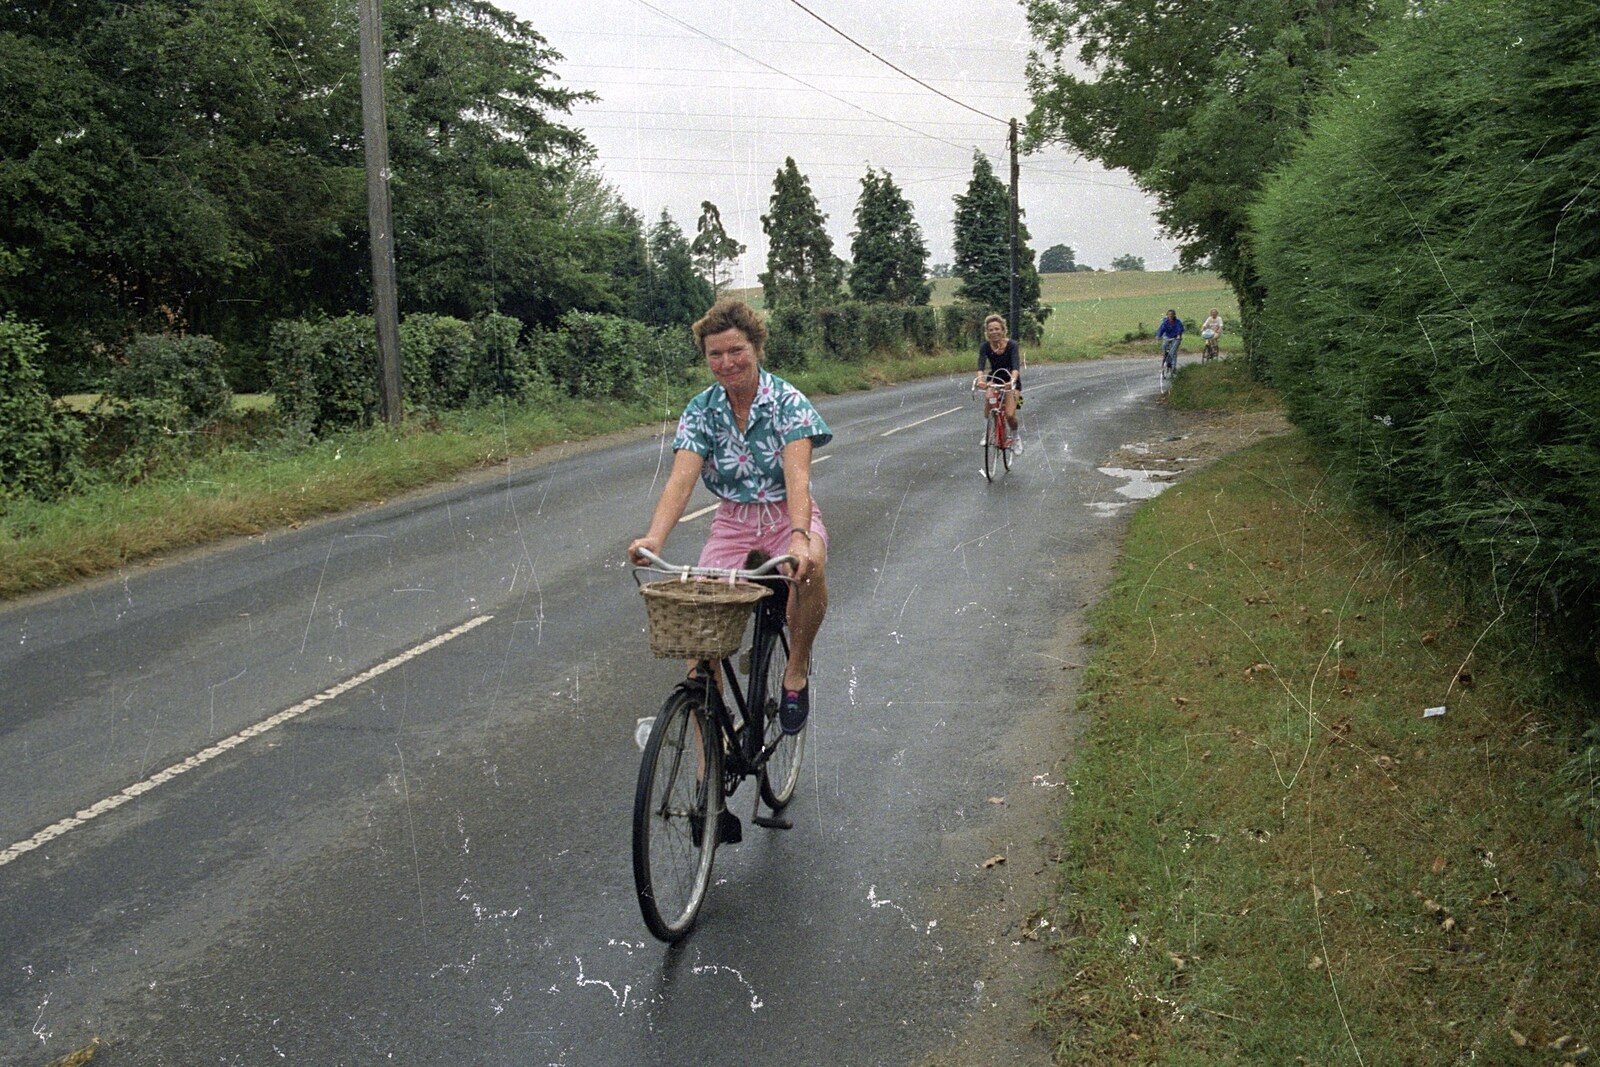 Brenda on her bike from A Bike Ride to Redgrave, Suffolk - 11th August 1990